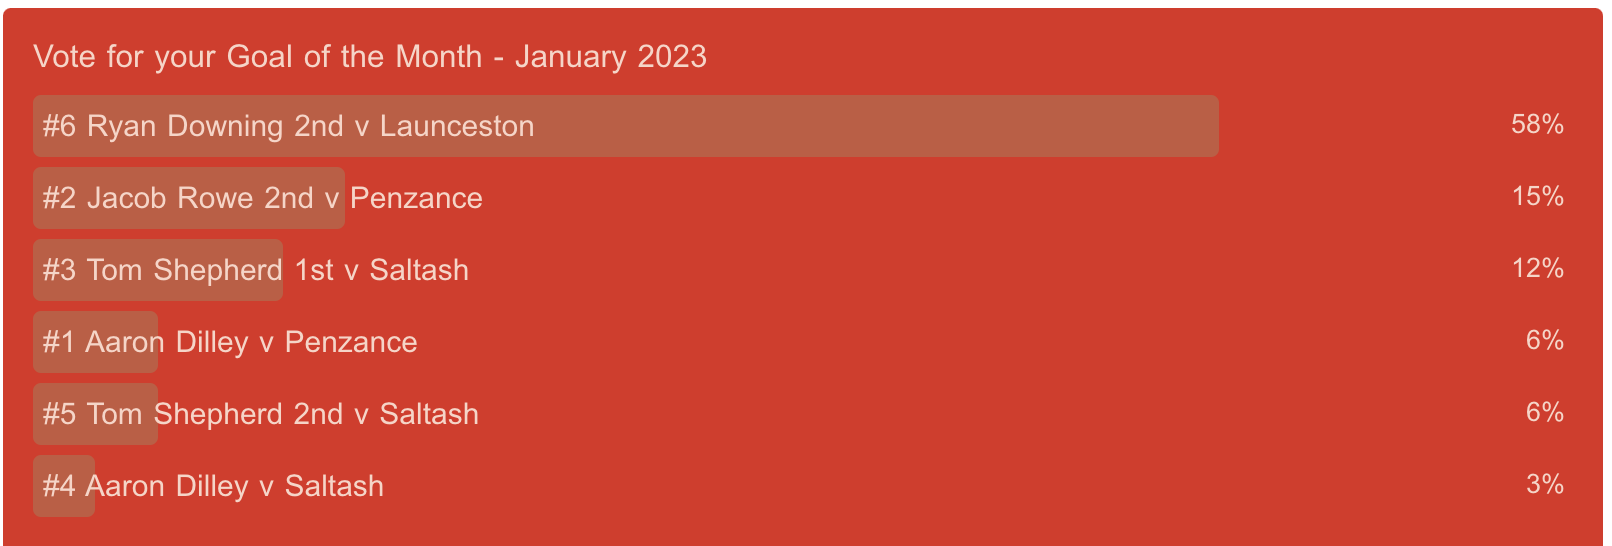 Goal of the Month Results - January 2023